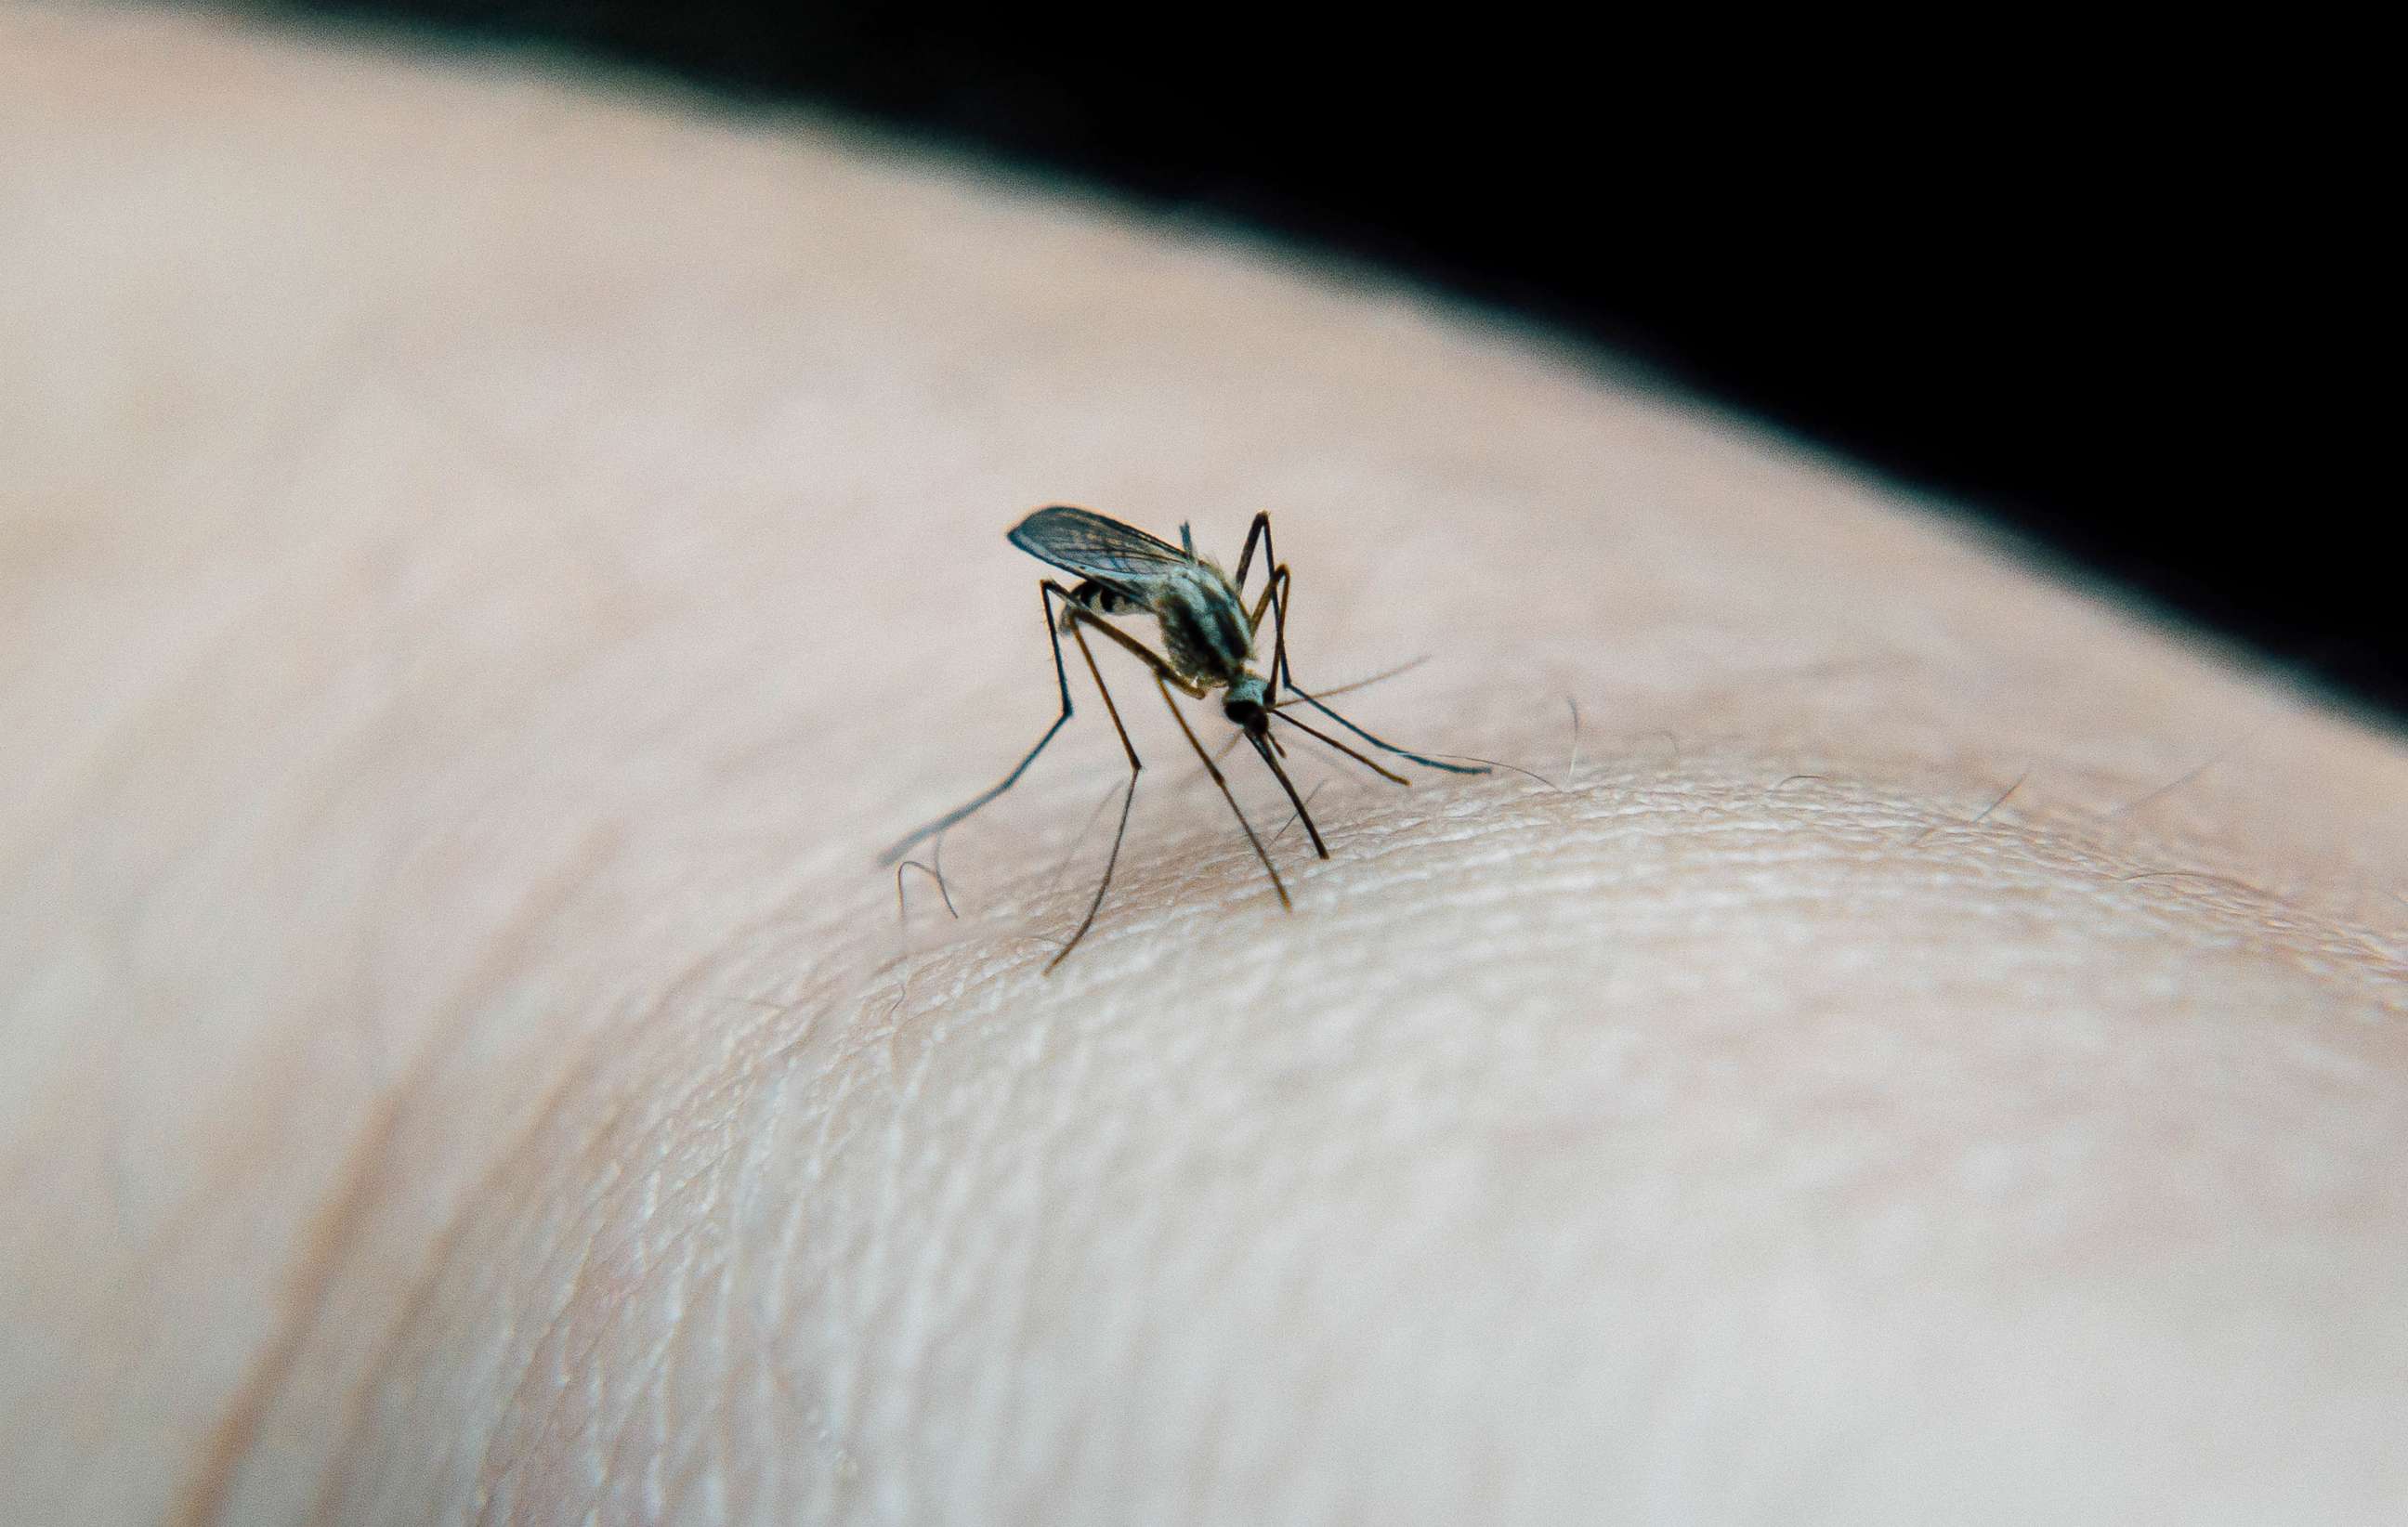 PHOTO: A mosquito is seen here in this stock photo.